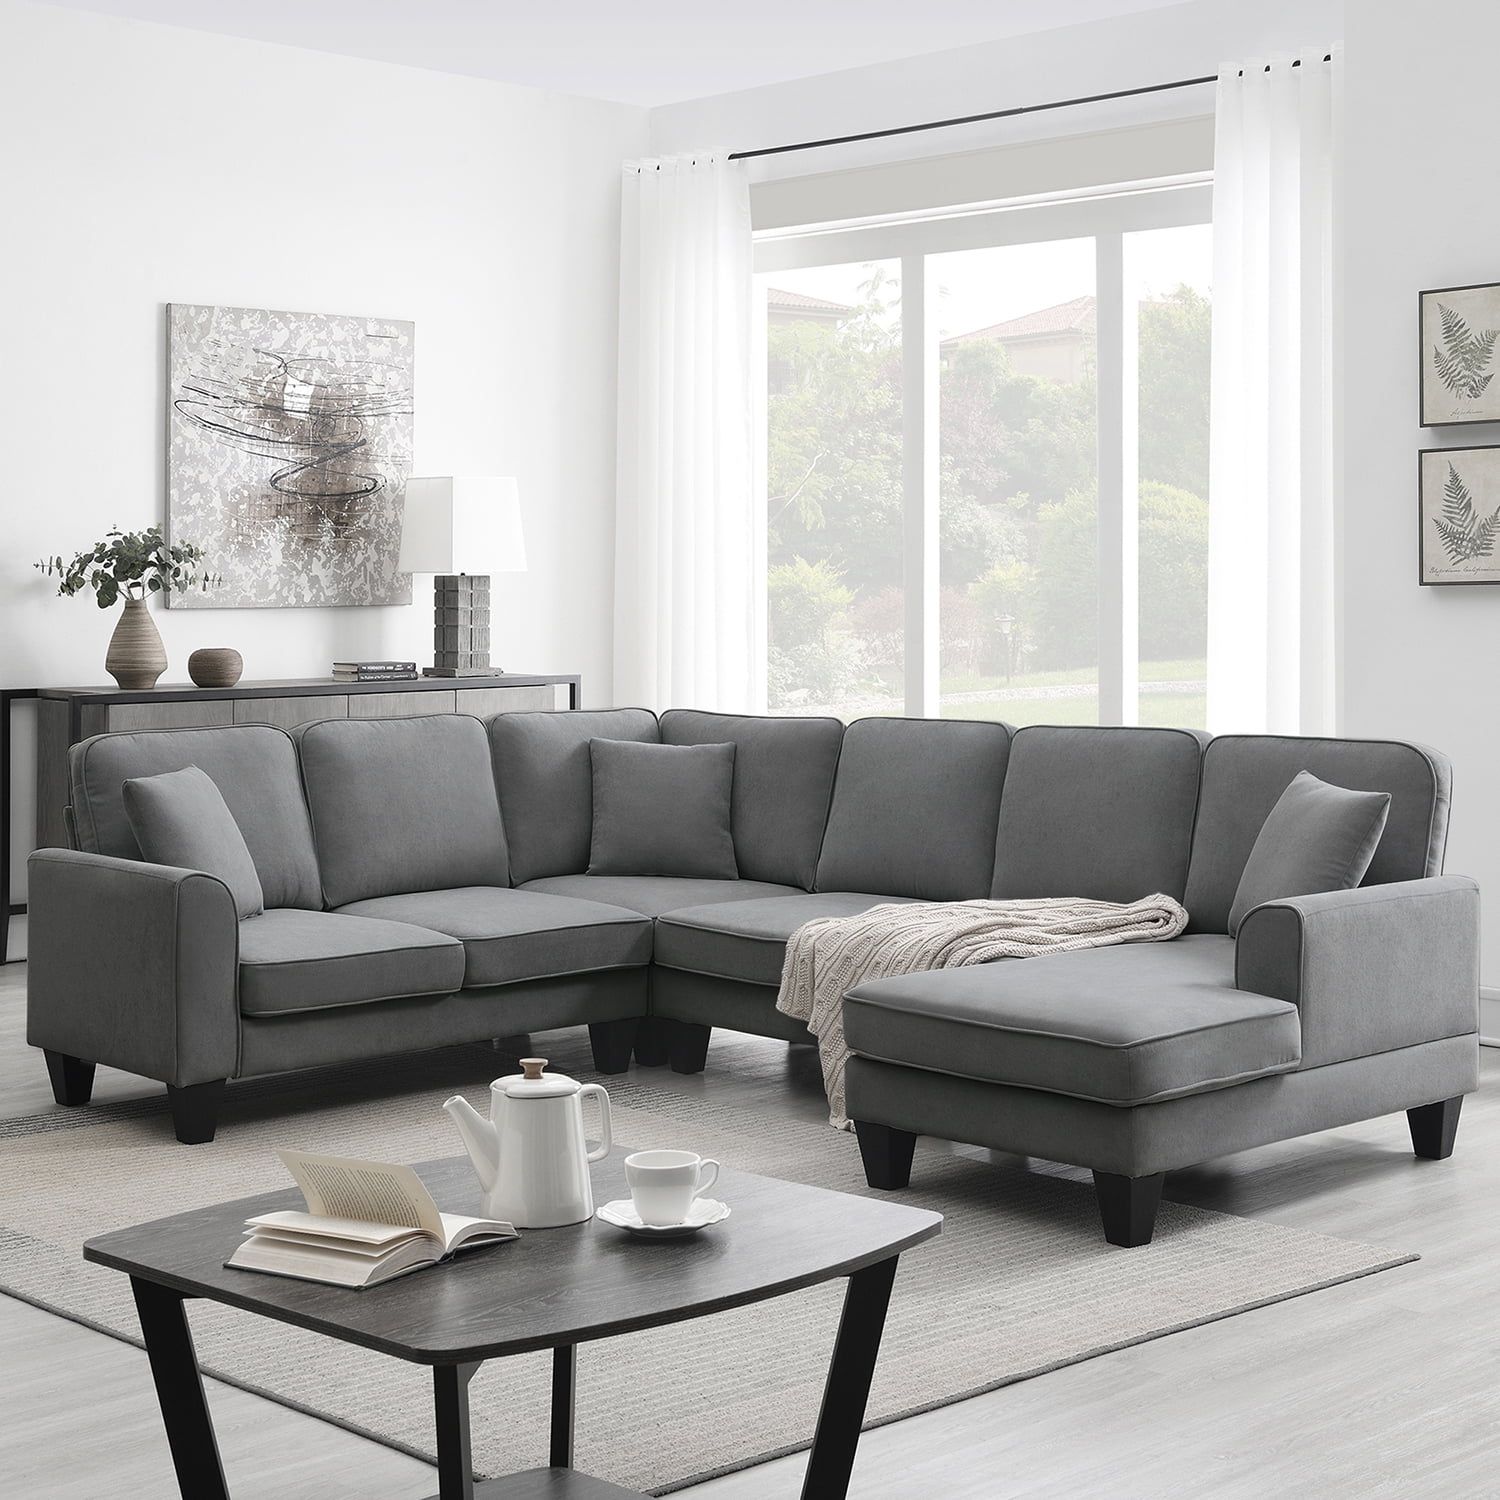 Churanty Convertible Modular Sectional Sofa With Chaise And Recliner,U  Shaped Couch 7 Seat Fabric Sleeper Sofa For Living Room,Dark Gray –  Walmart Throughout Dark Gray Sectional Sofas (View 14 of 15)